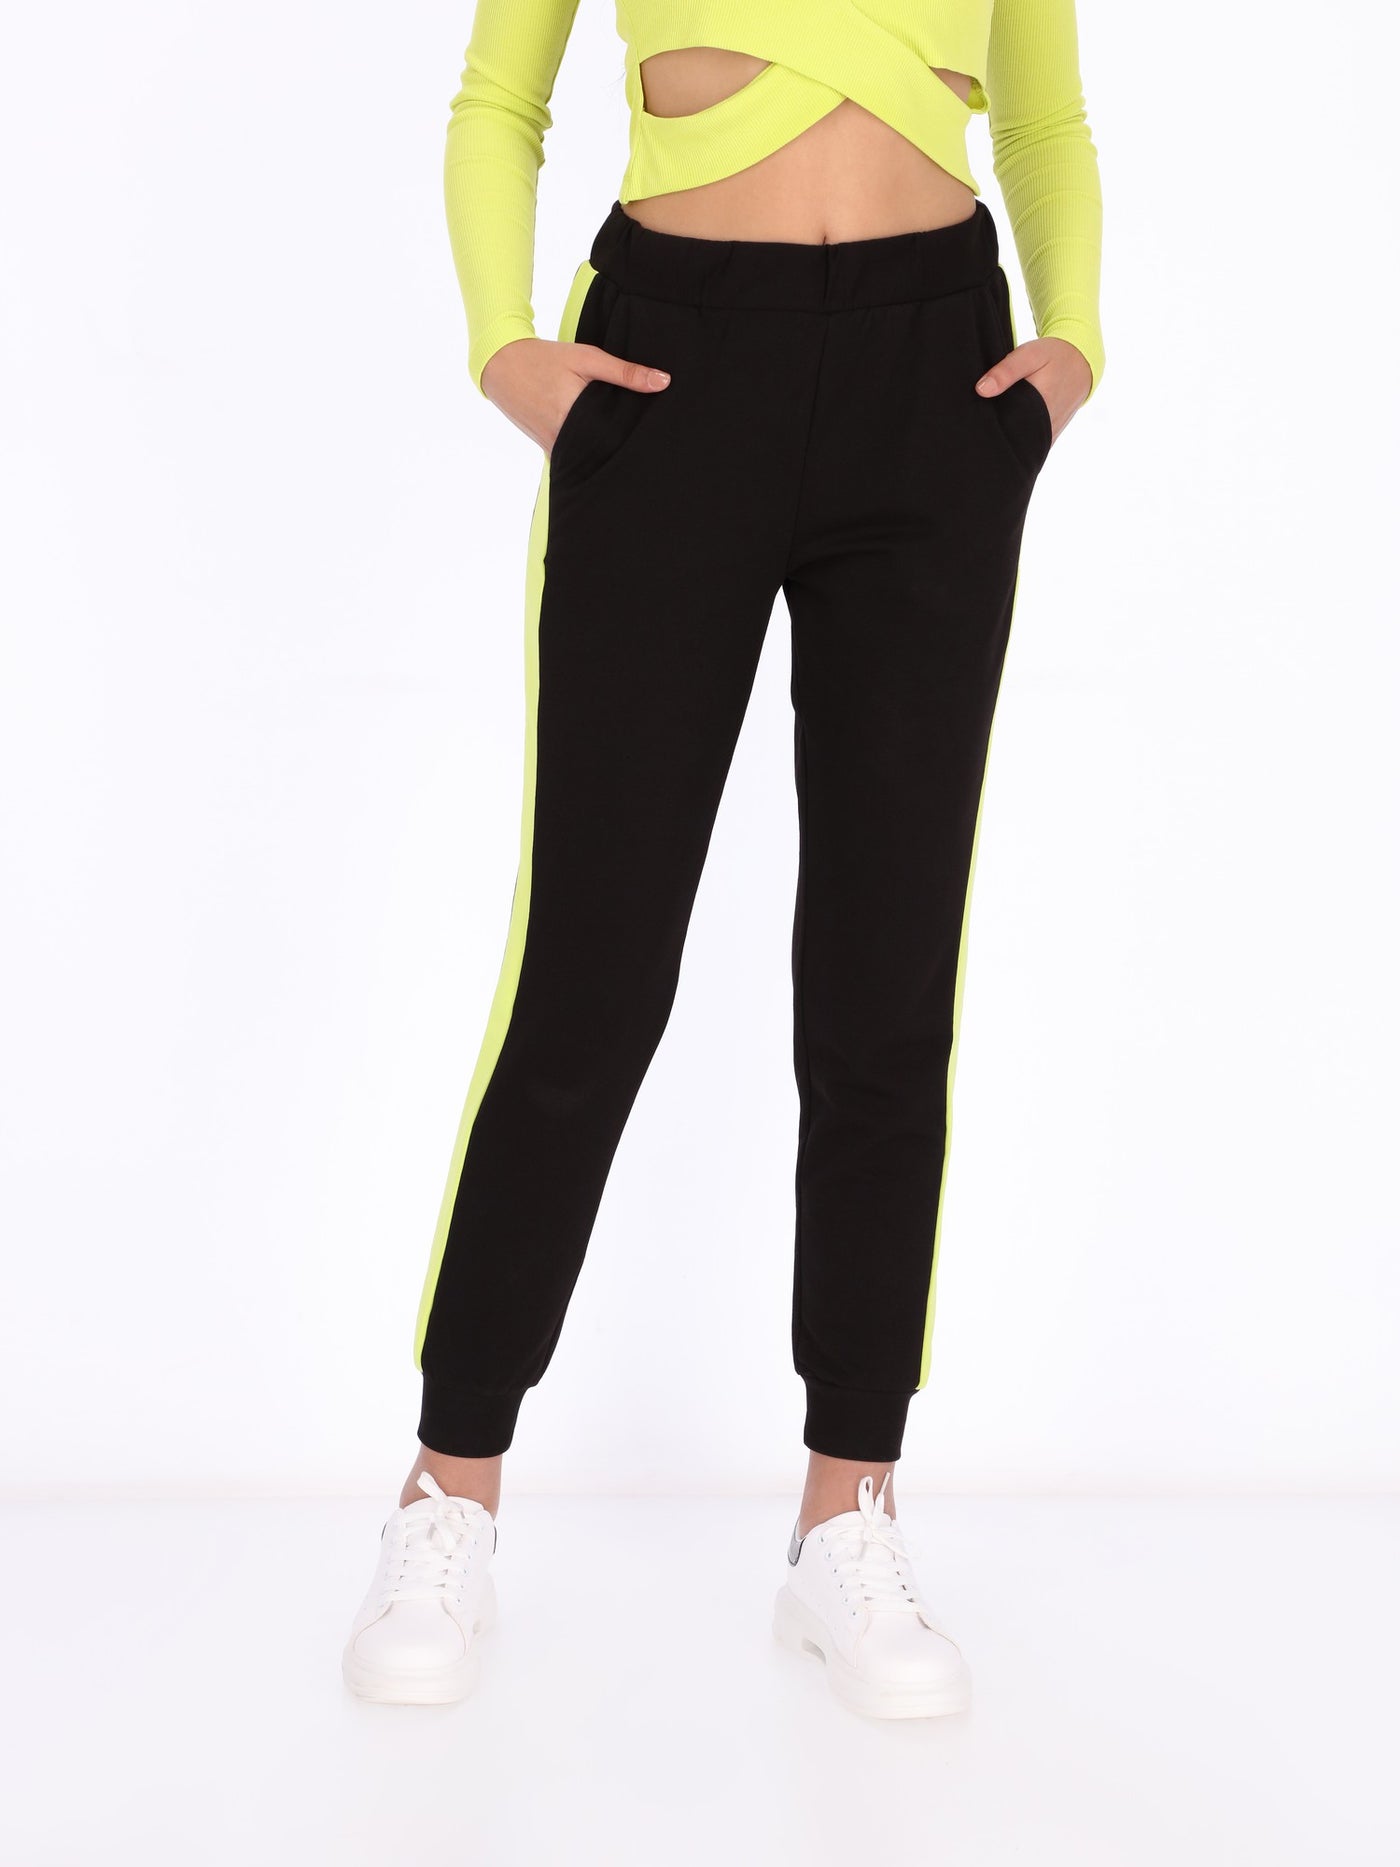  OR Women's Contrast Side Trim Joggers